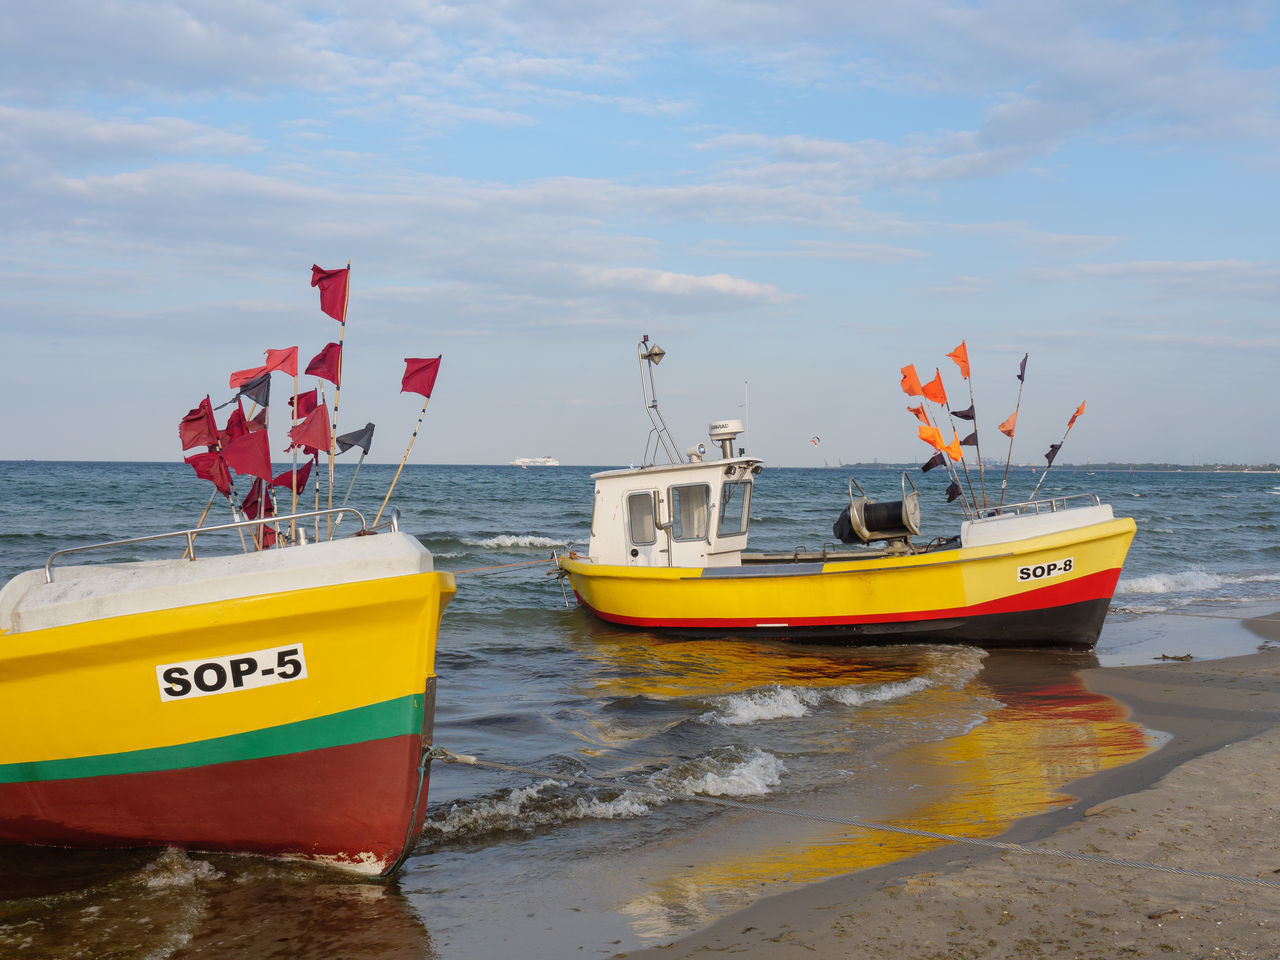 VIEW OF BOATS MOORED ON BEACH AGAINST SKY